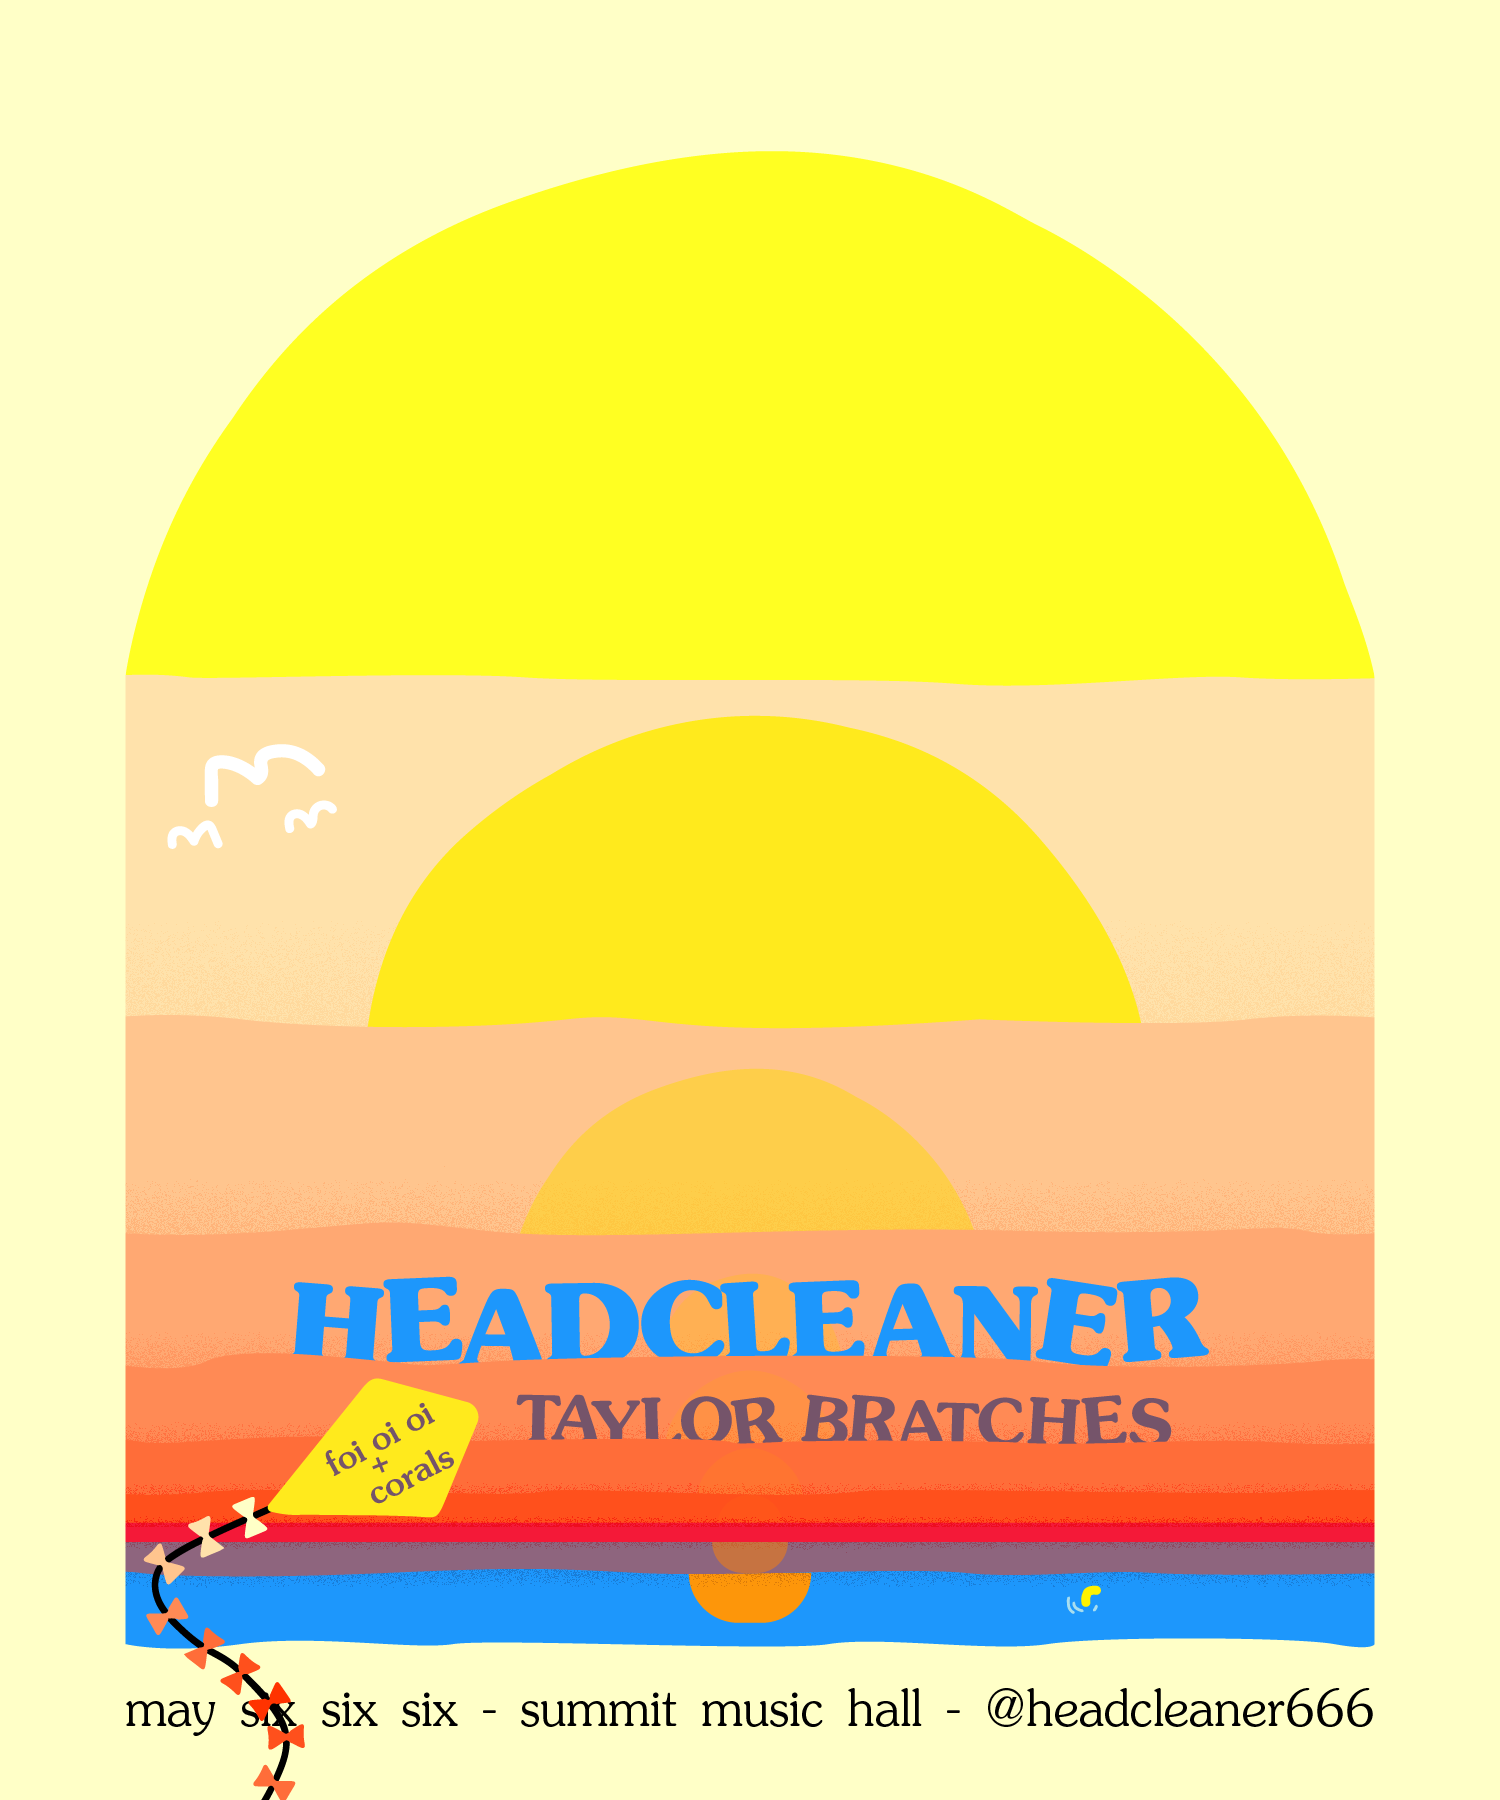 Headcleaner - Taylor Bratches - Página frontal